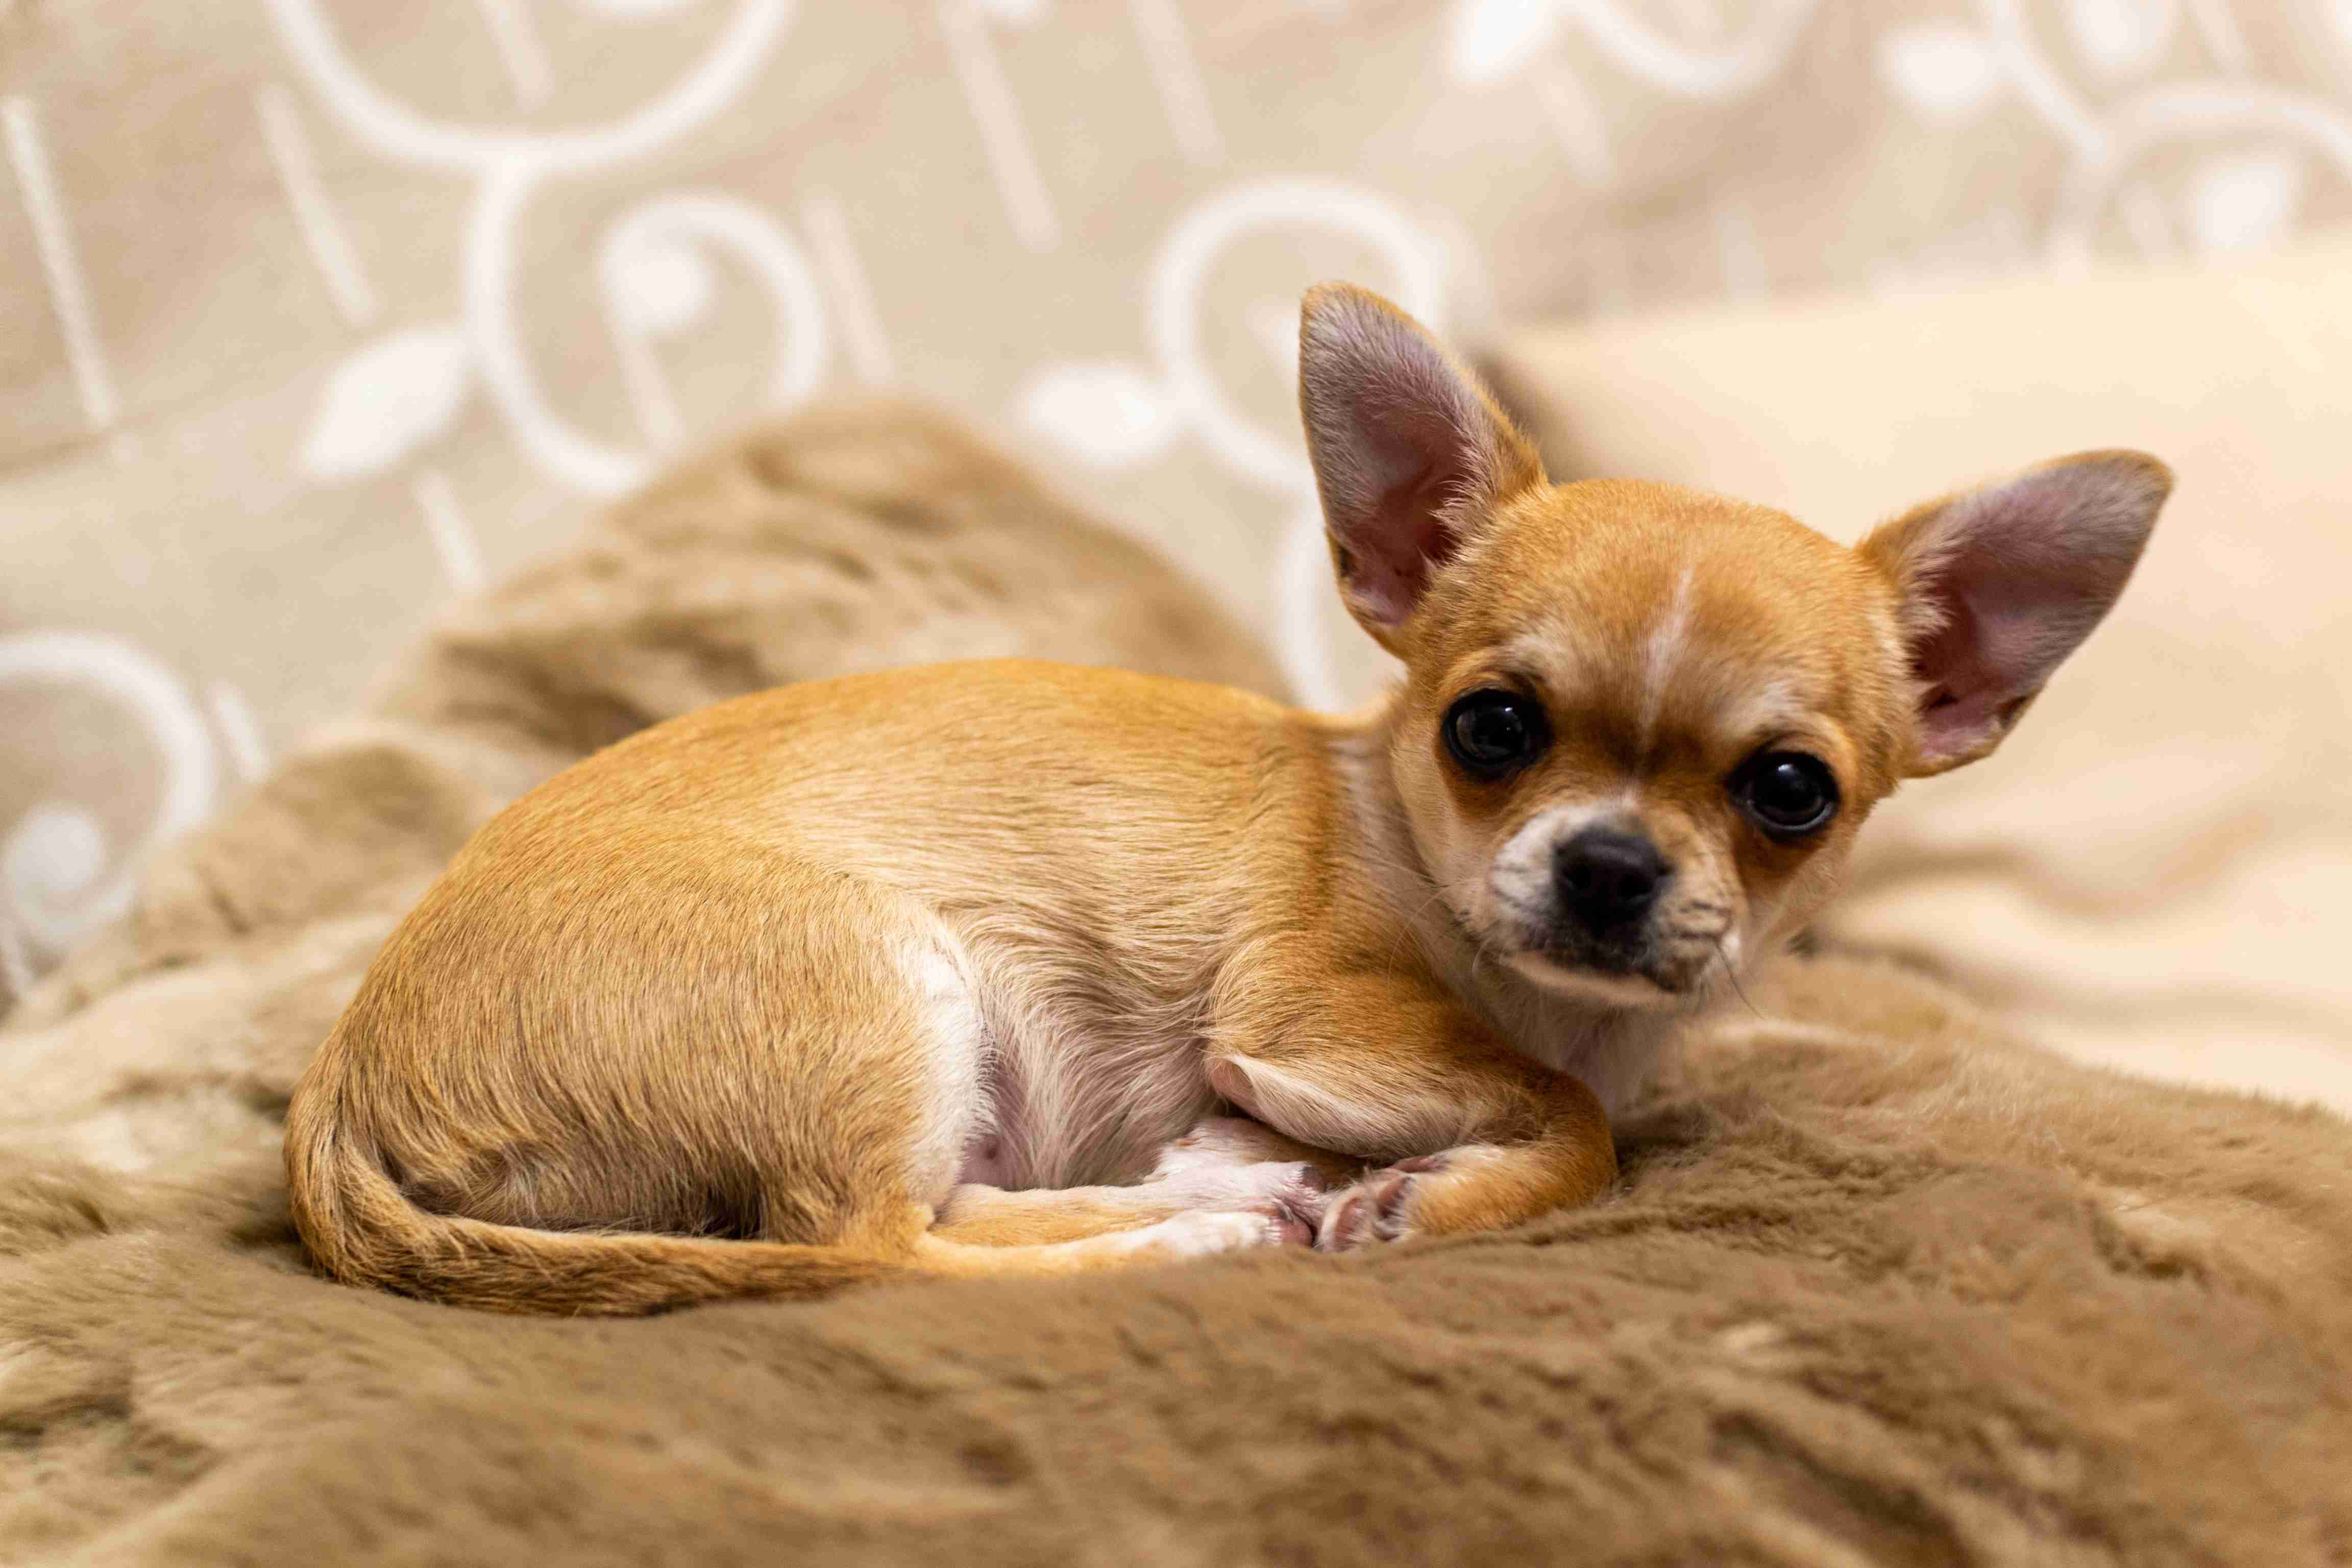 How can you safely approach a Chihuahua with anger issues?